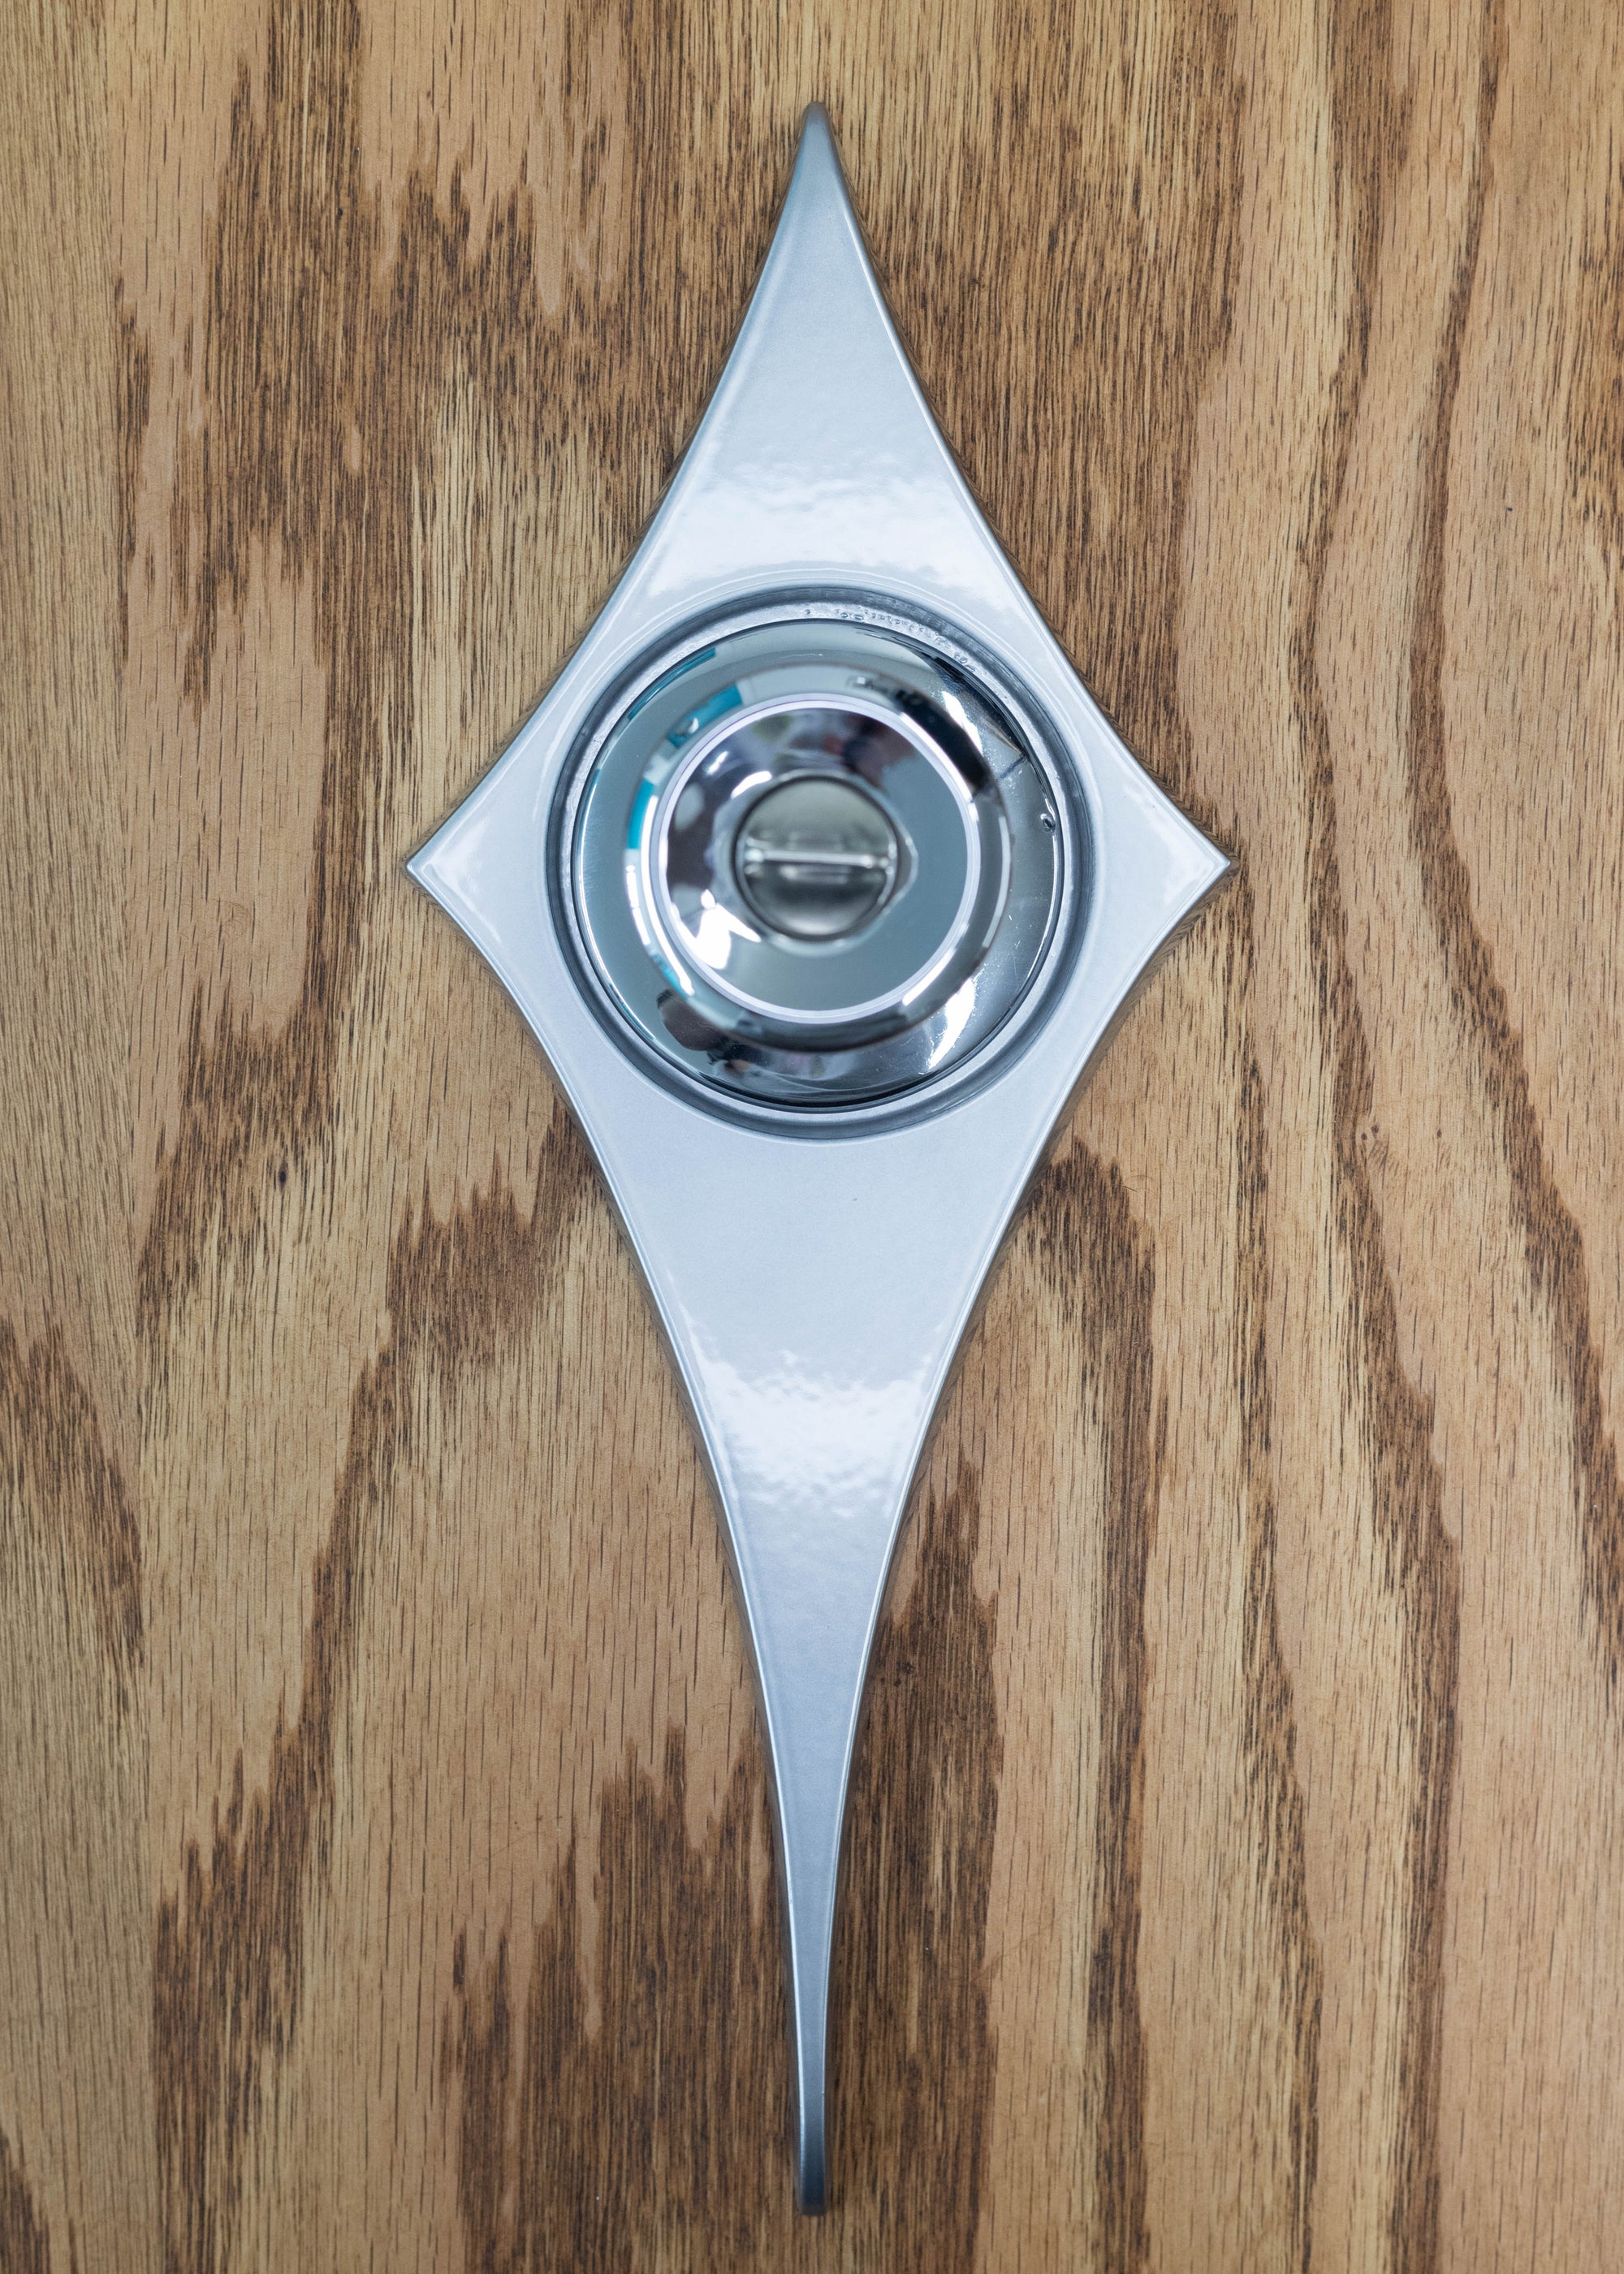 The silver escutcheon pictured with a chrome doorknob.